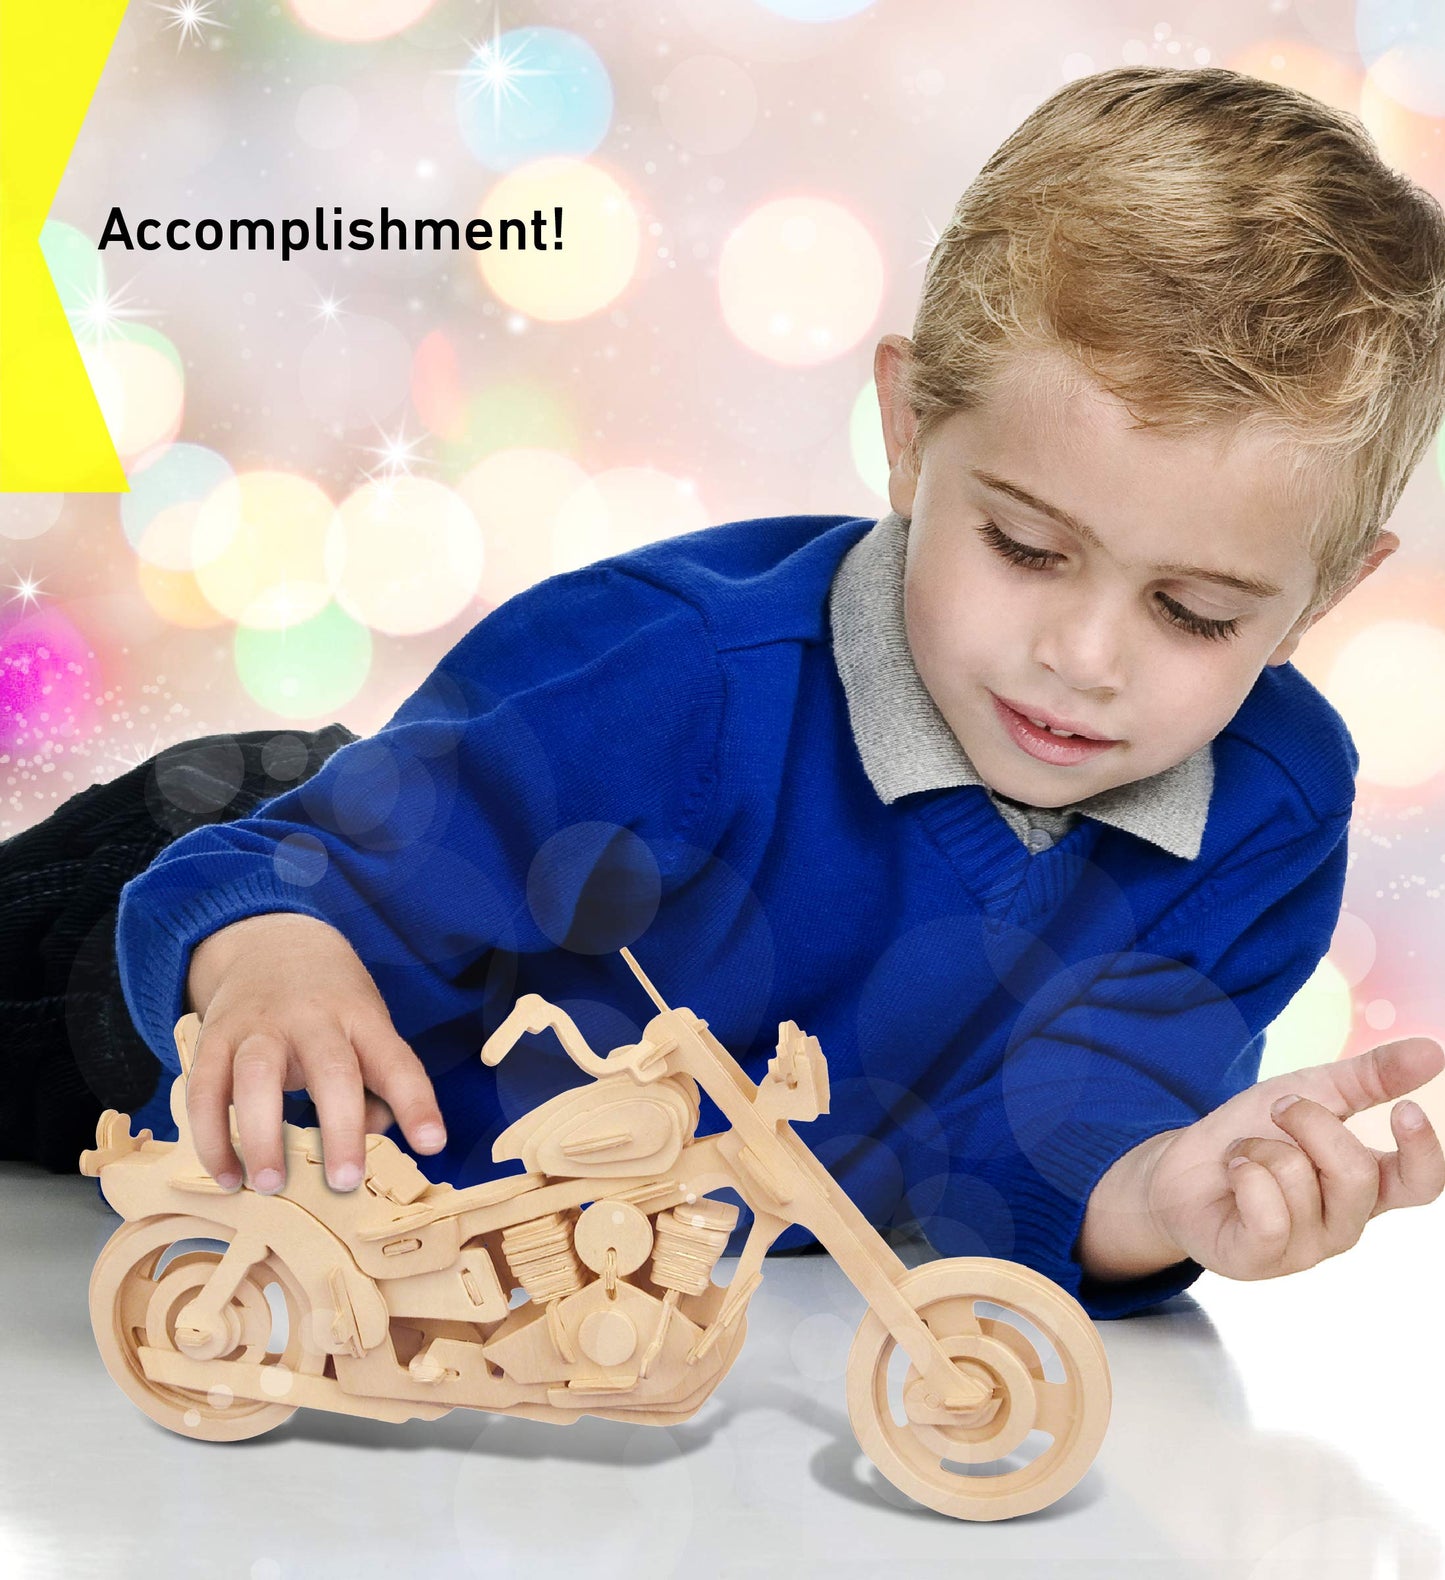 Puzzled 3D Puzzle Motorcycle Wood Craft Construction Model Kit, Fun & Educational DIY Wooden Toy Assemble Model Unfinished Crafting Hobby Puzzle to